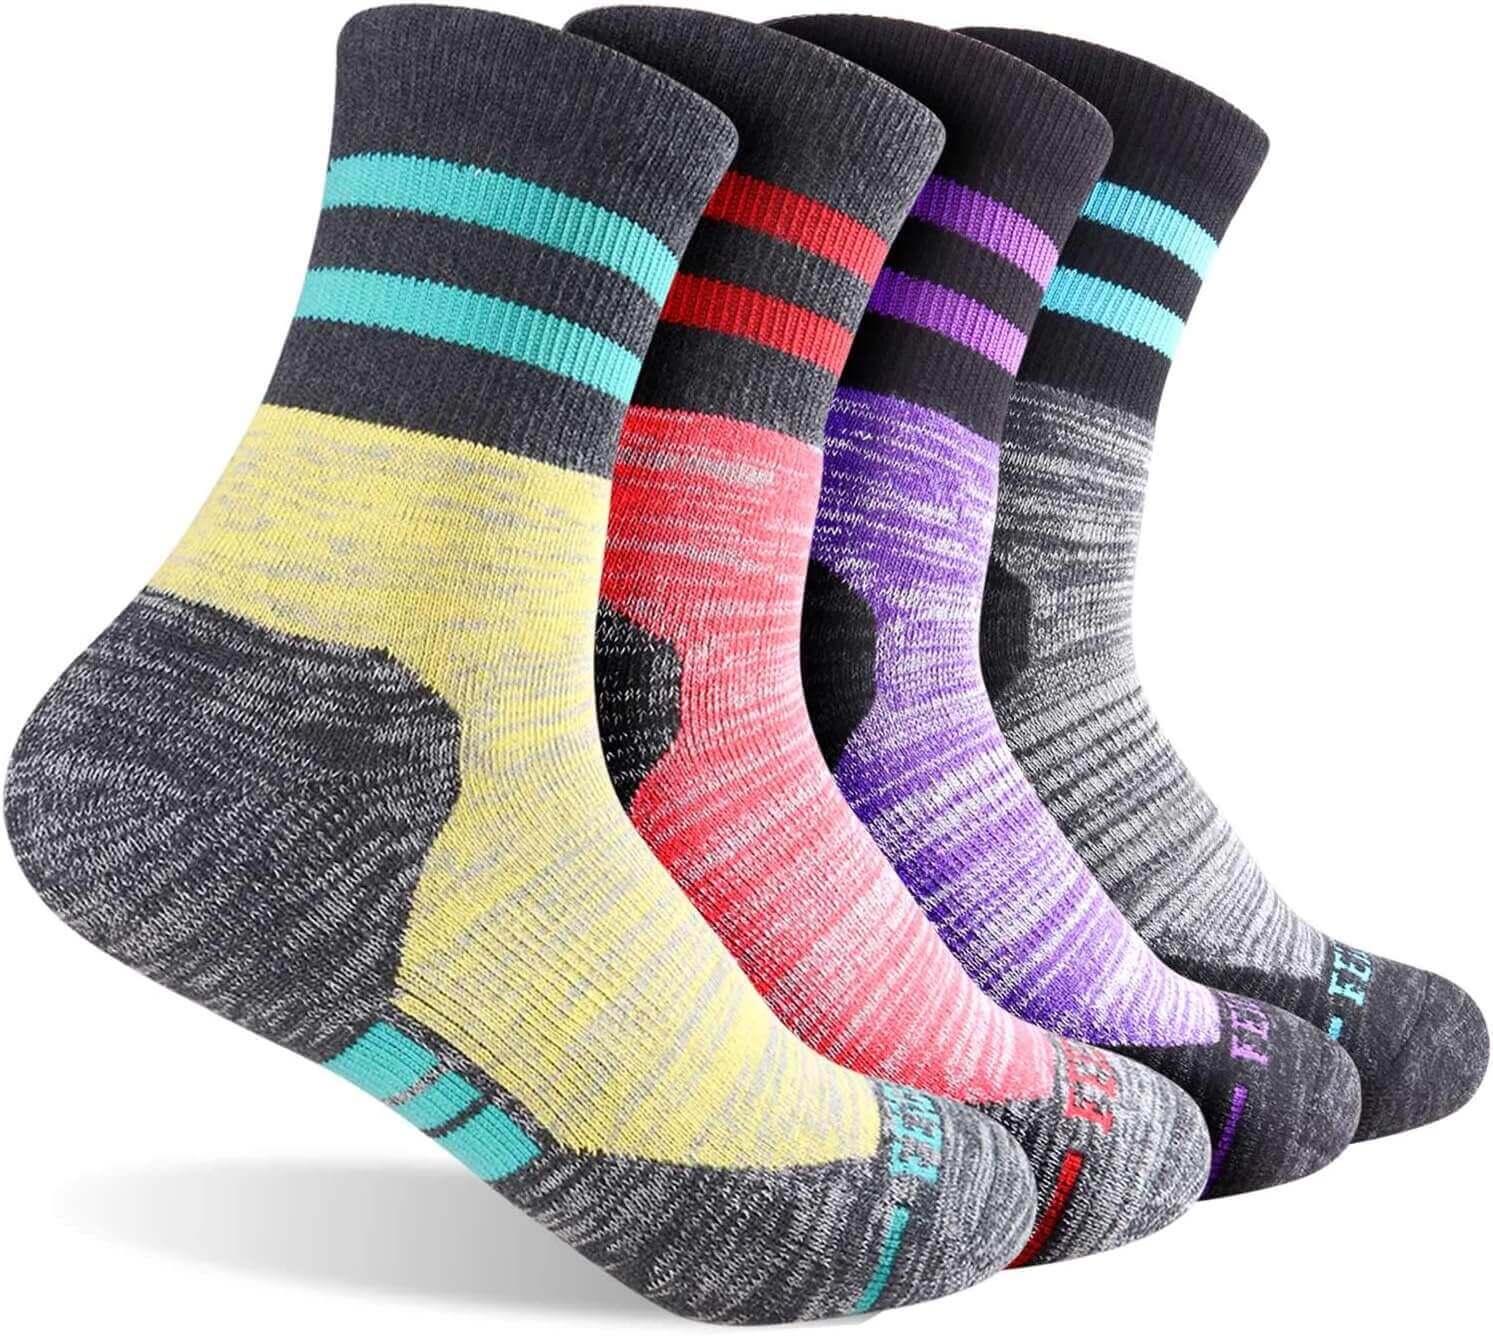 Shop The Latest >Women's Hiking Walking Socks, Multi-pack Outdoor Recreation > *Only $28.34*> From The Top Brand > *FEIDEERl* > Shop Now and Get Free Shipping On Orders Over $45.00 >*Shop Earth Foot*